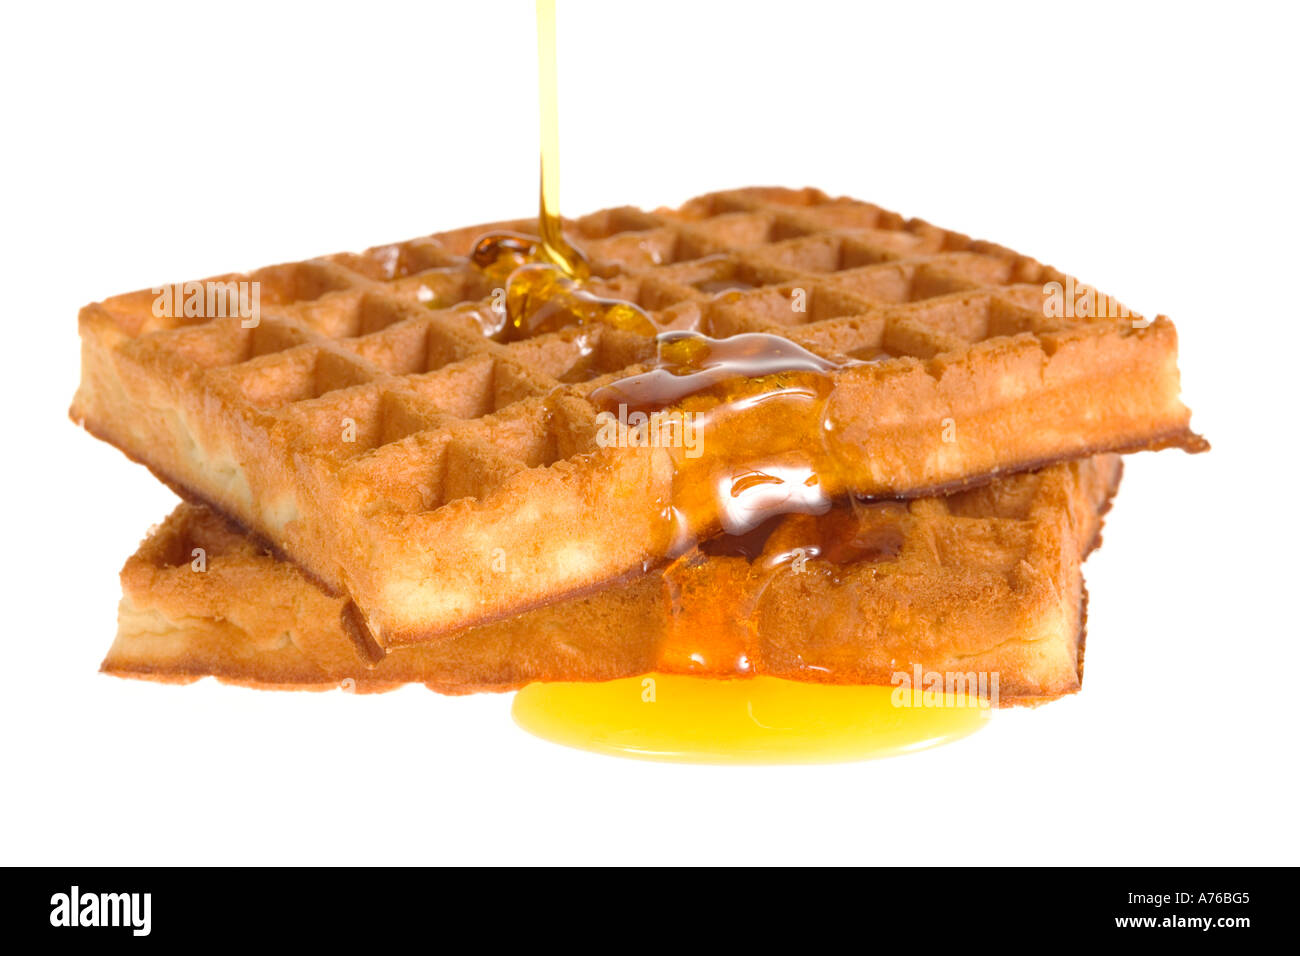 Maple syrup being poured over two hot belgian waffles on a pure white background. Stock Photo